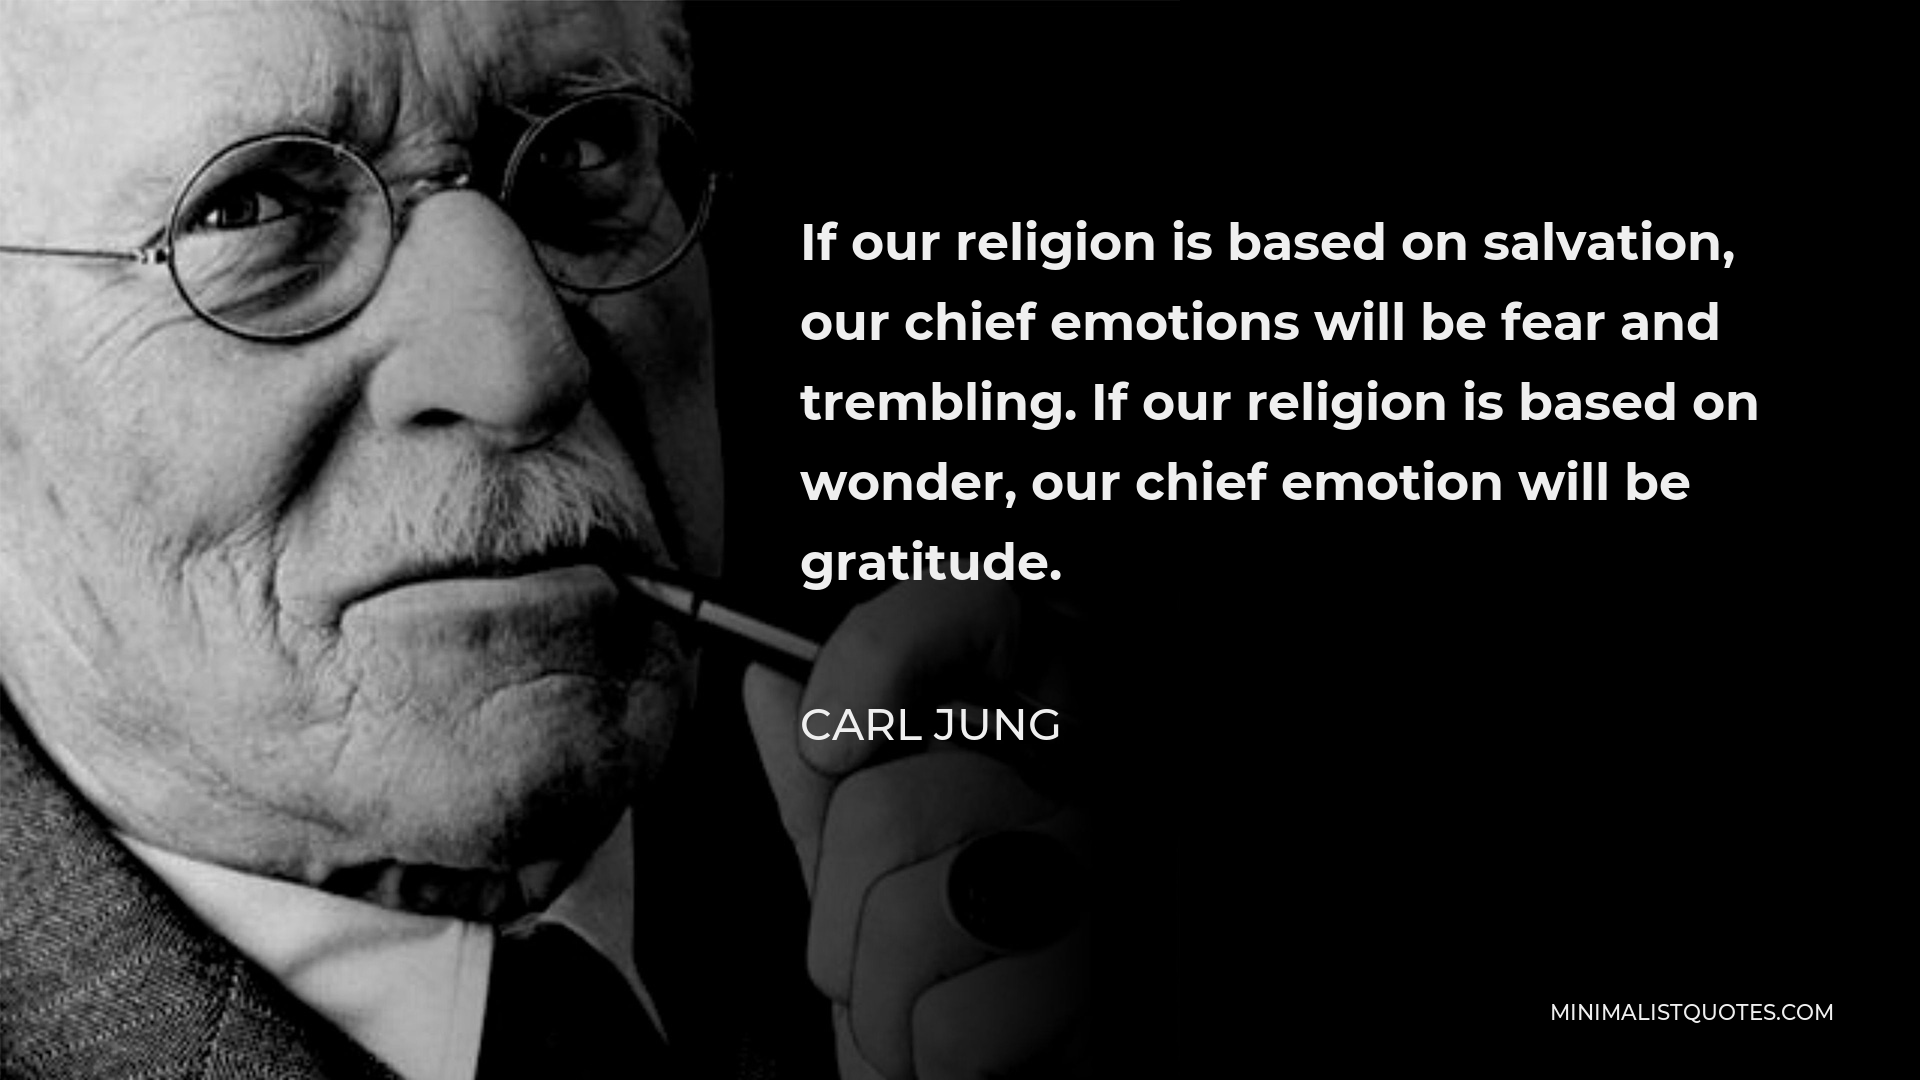 Carl Jung Quote - If our religion is based on salvation, our chief emotions will be fear and trembling. If our religion is based on wonder, our chief emotion will be gratitude.